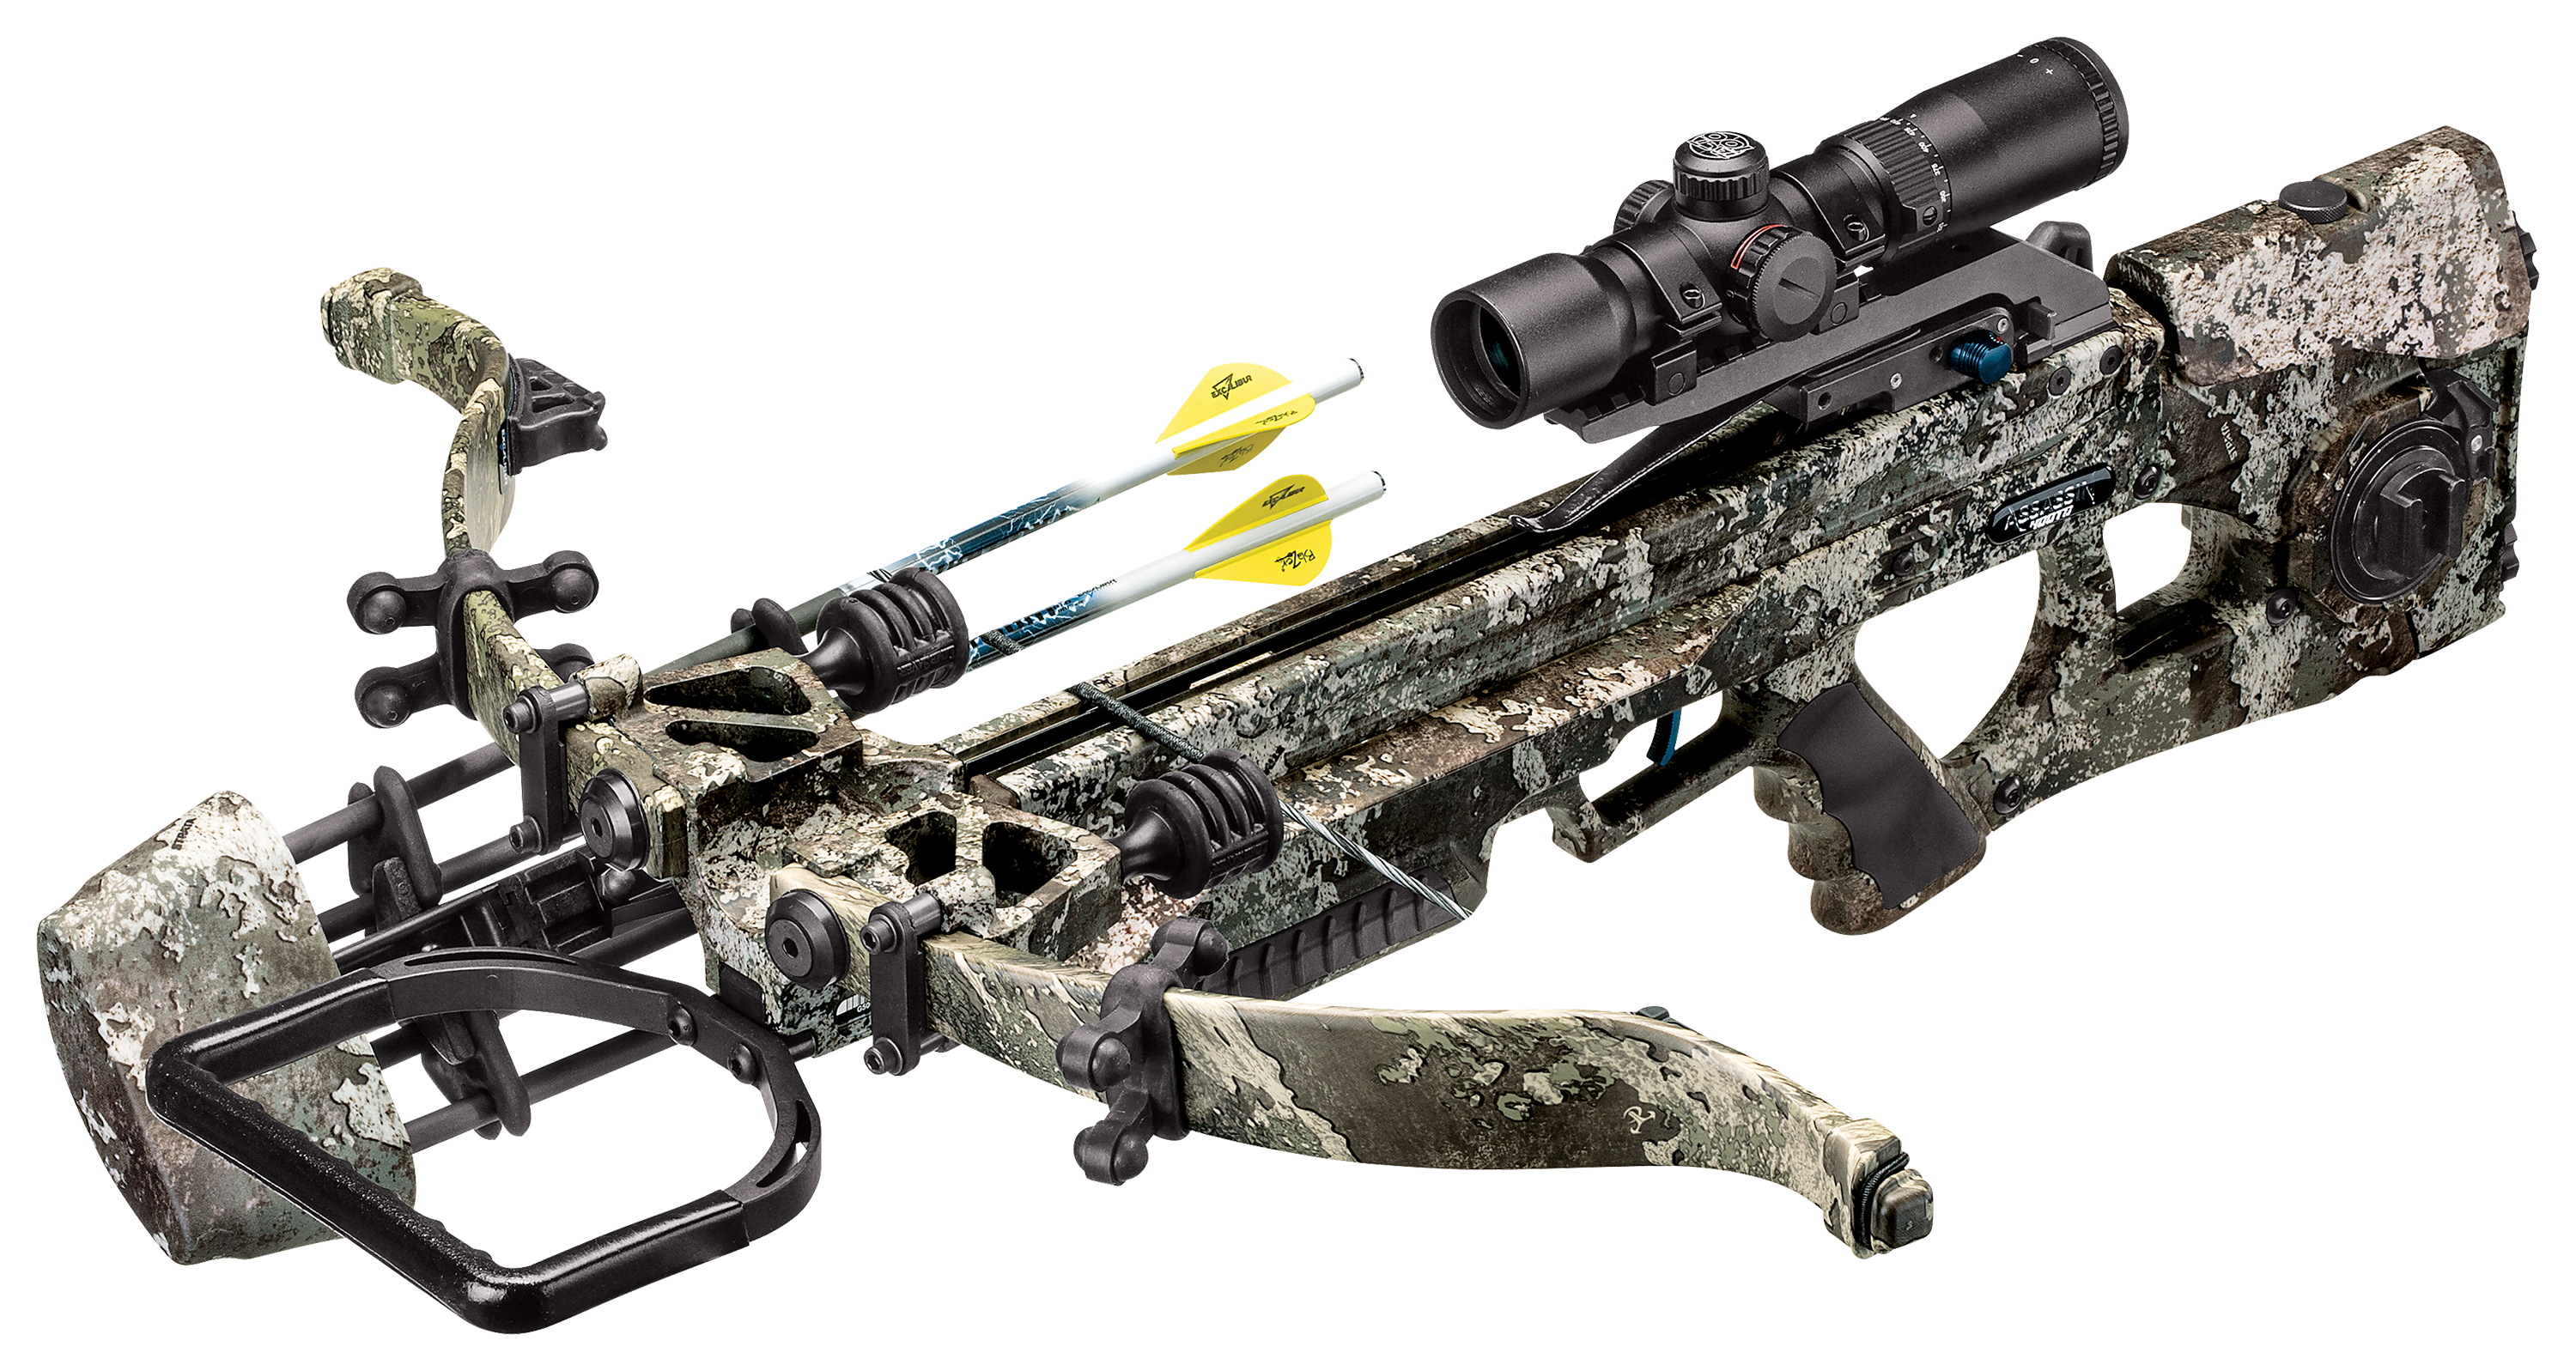 Excalibur Assassin 400 TD Crossbow Package with Charger Cocking Device